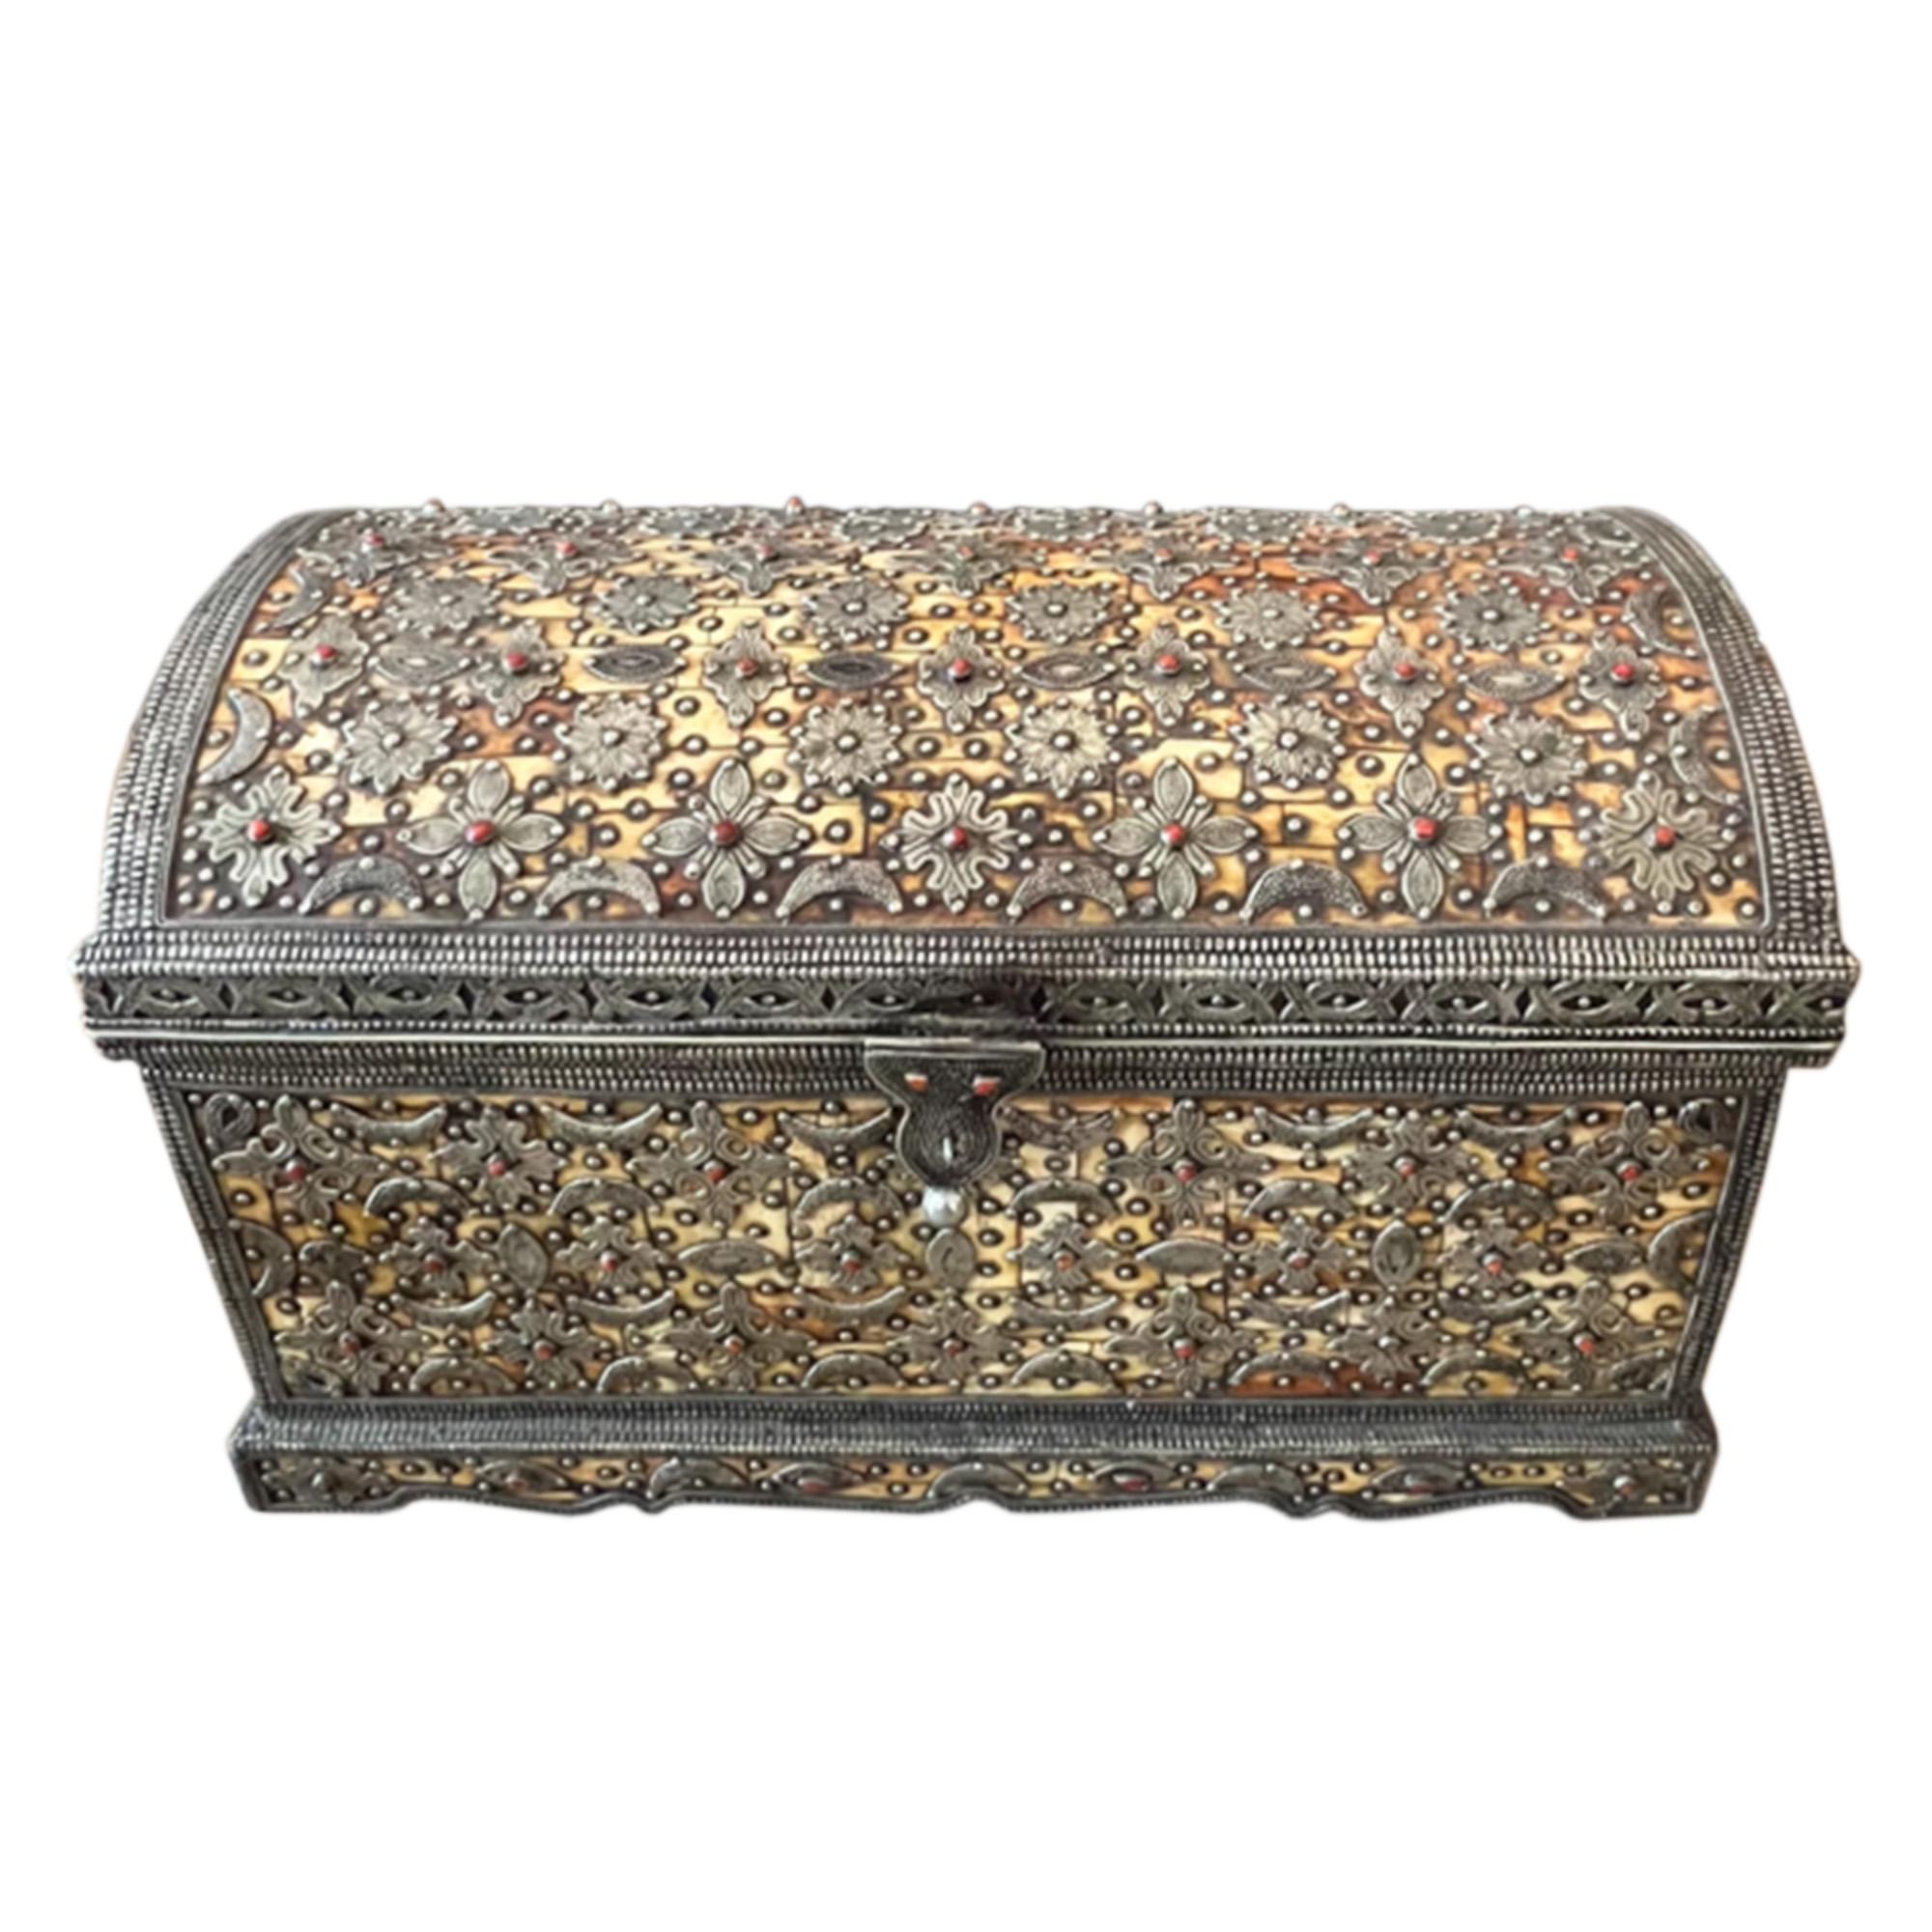 This trunk has been beautifully decorated using agate and silver on a layer of bone. It has a lovely latch - please take a look at all the pictures to see the intricate detail and leather lining inside. 

Made in Morocco in the 1960s. 

Very